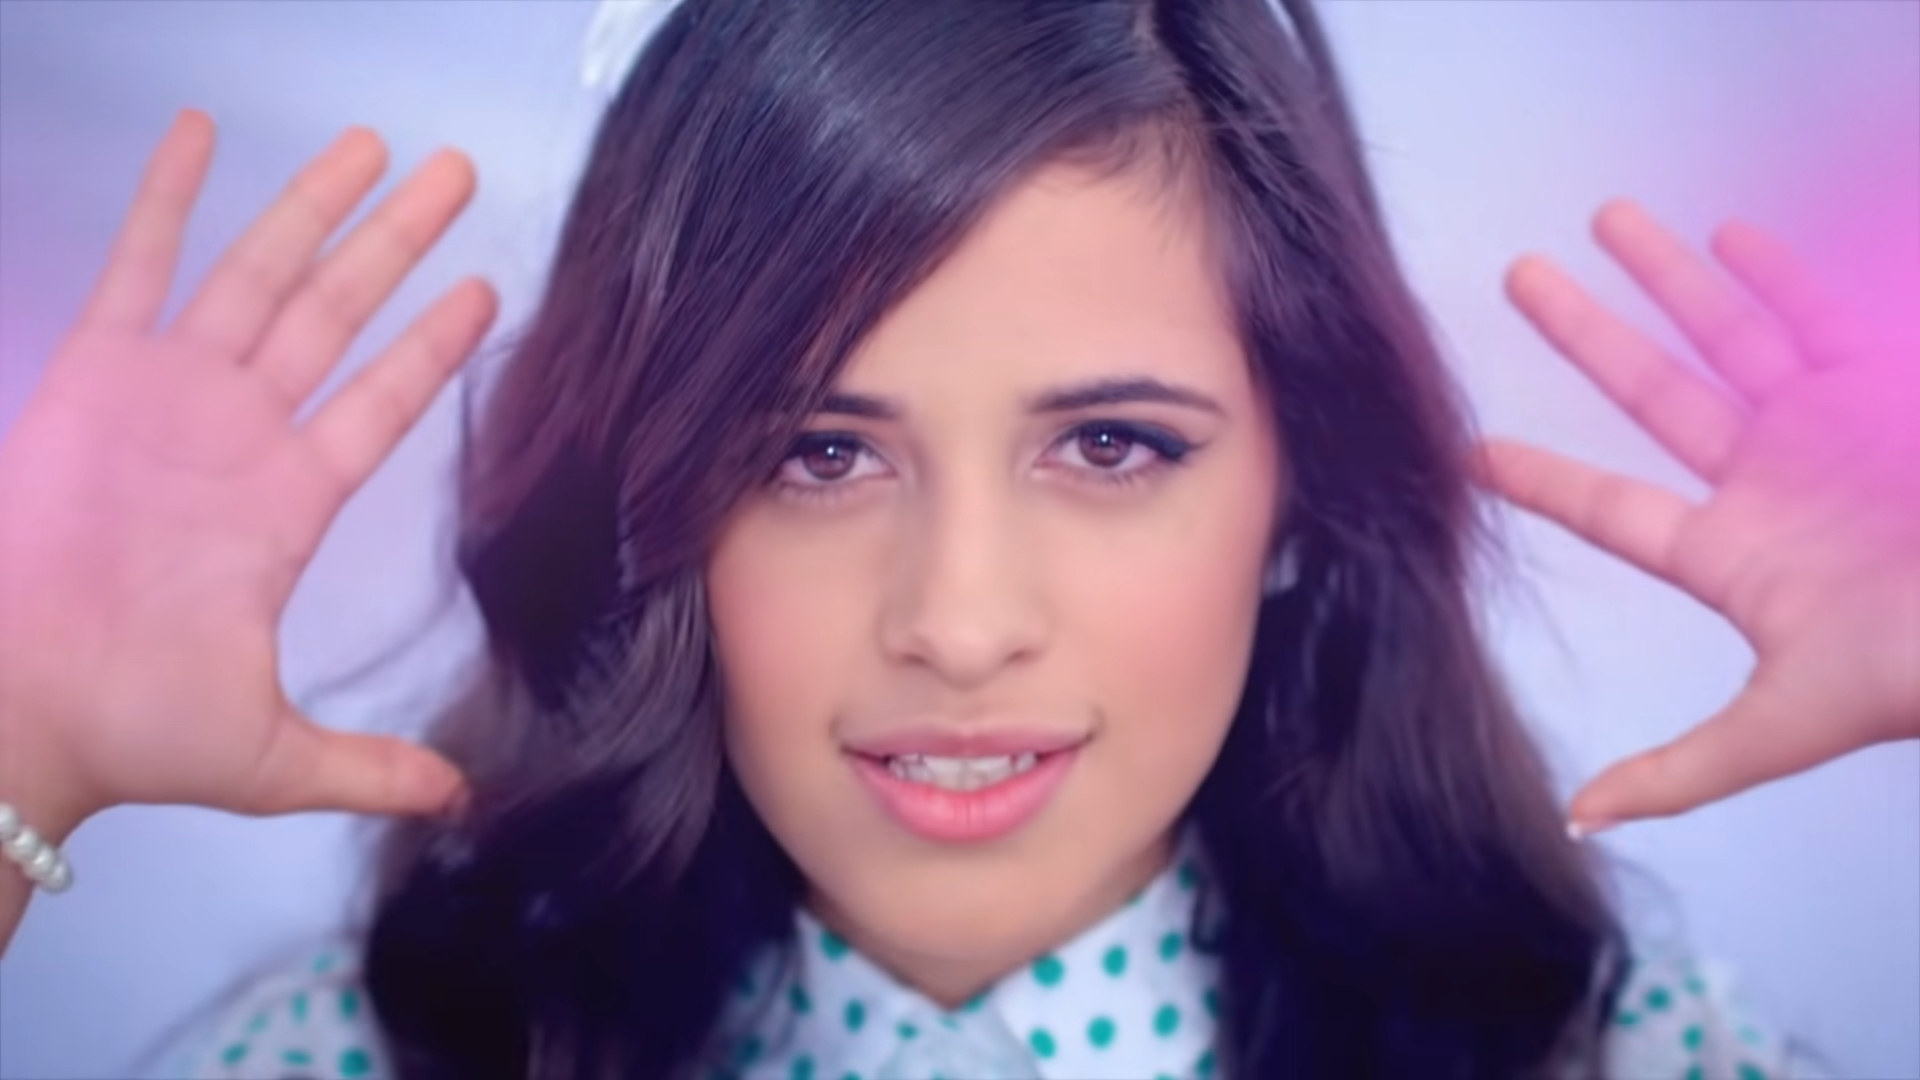 Headshot of Camila holding her hands up